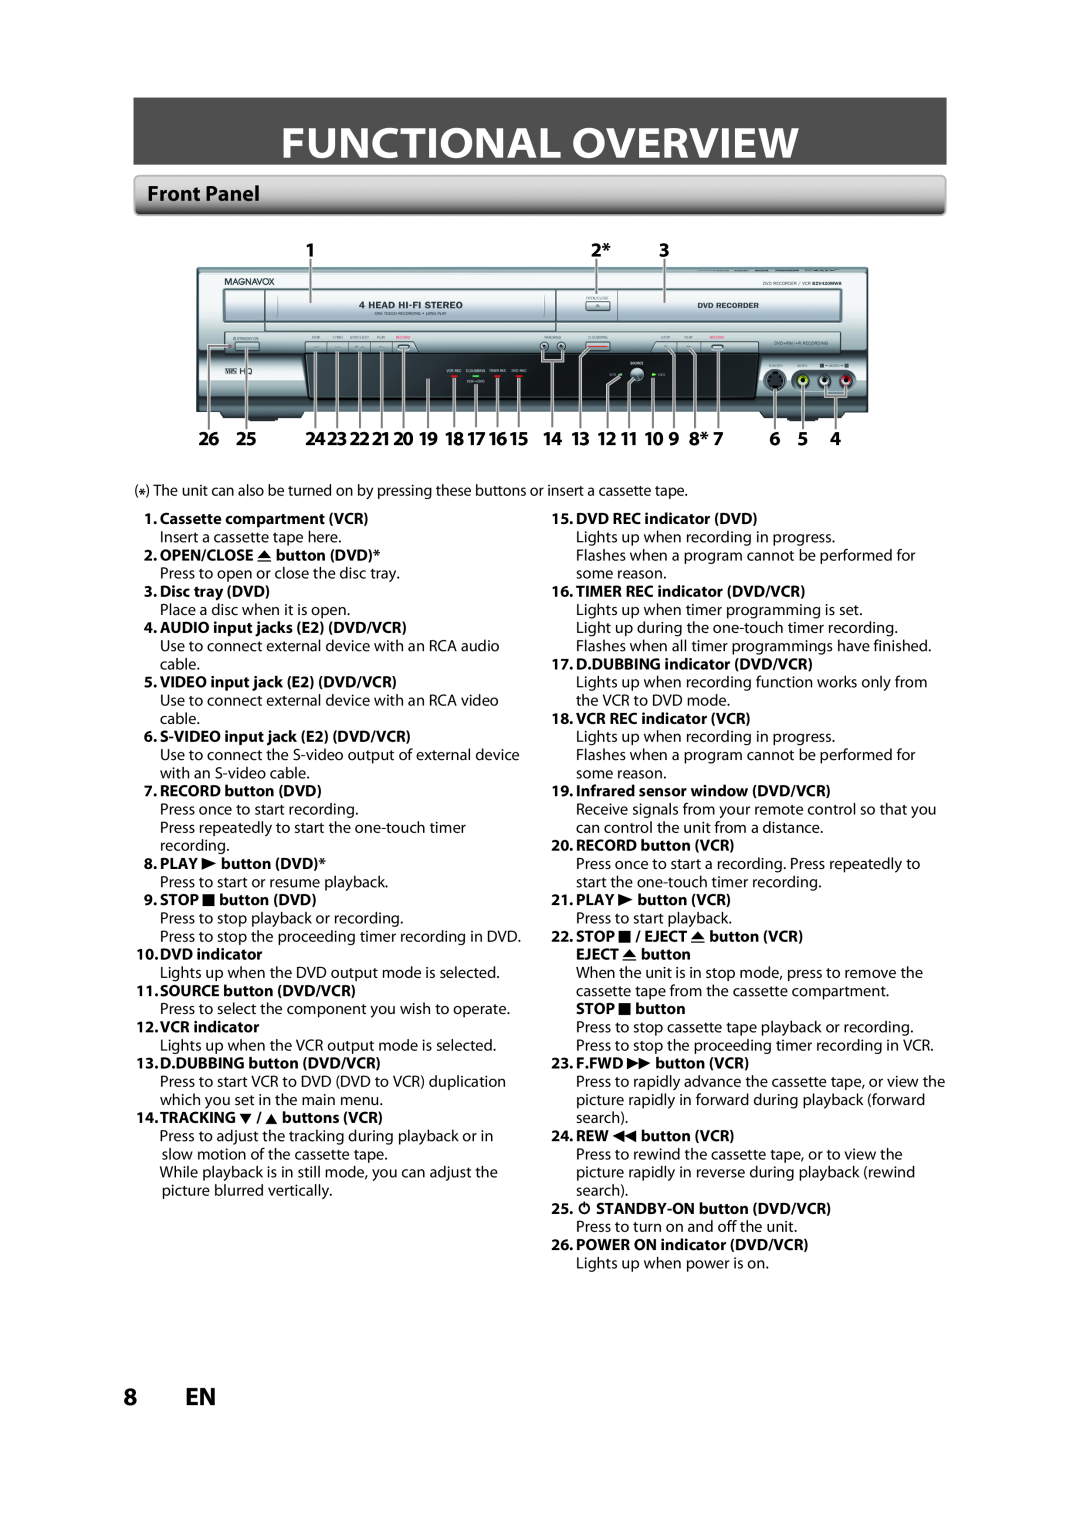 FUNAI BZV420MW8 Functional Overview, 8 EN, Front Panel, 2423222120 19, 14 13 12 11 10 9 8, Disc tray DVD, DVD indicator 